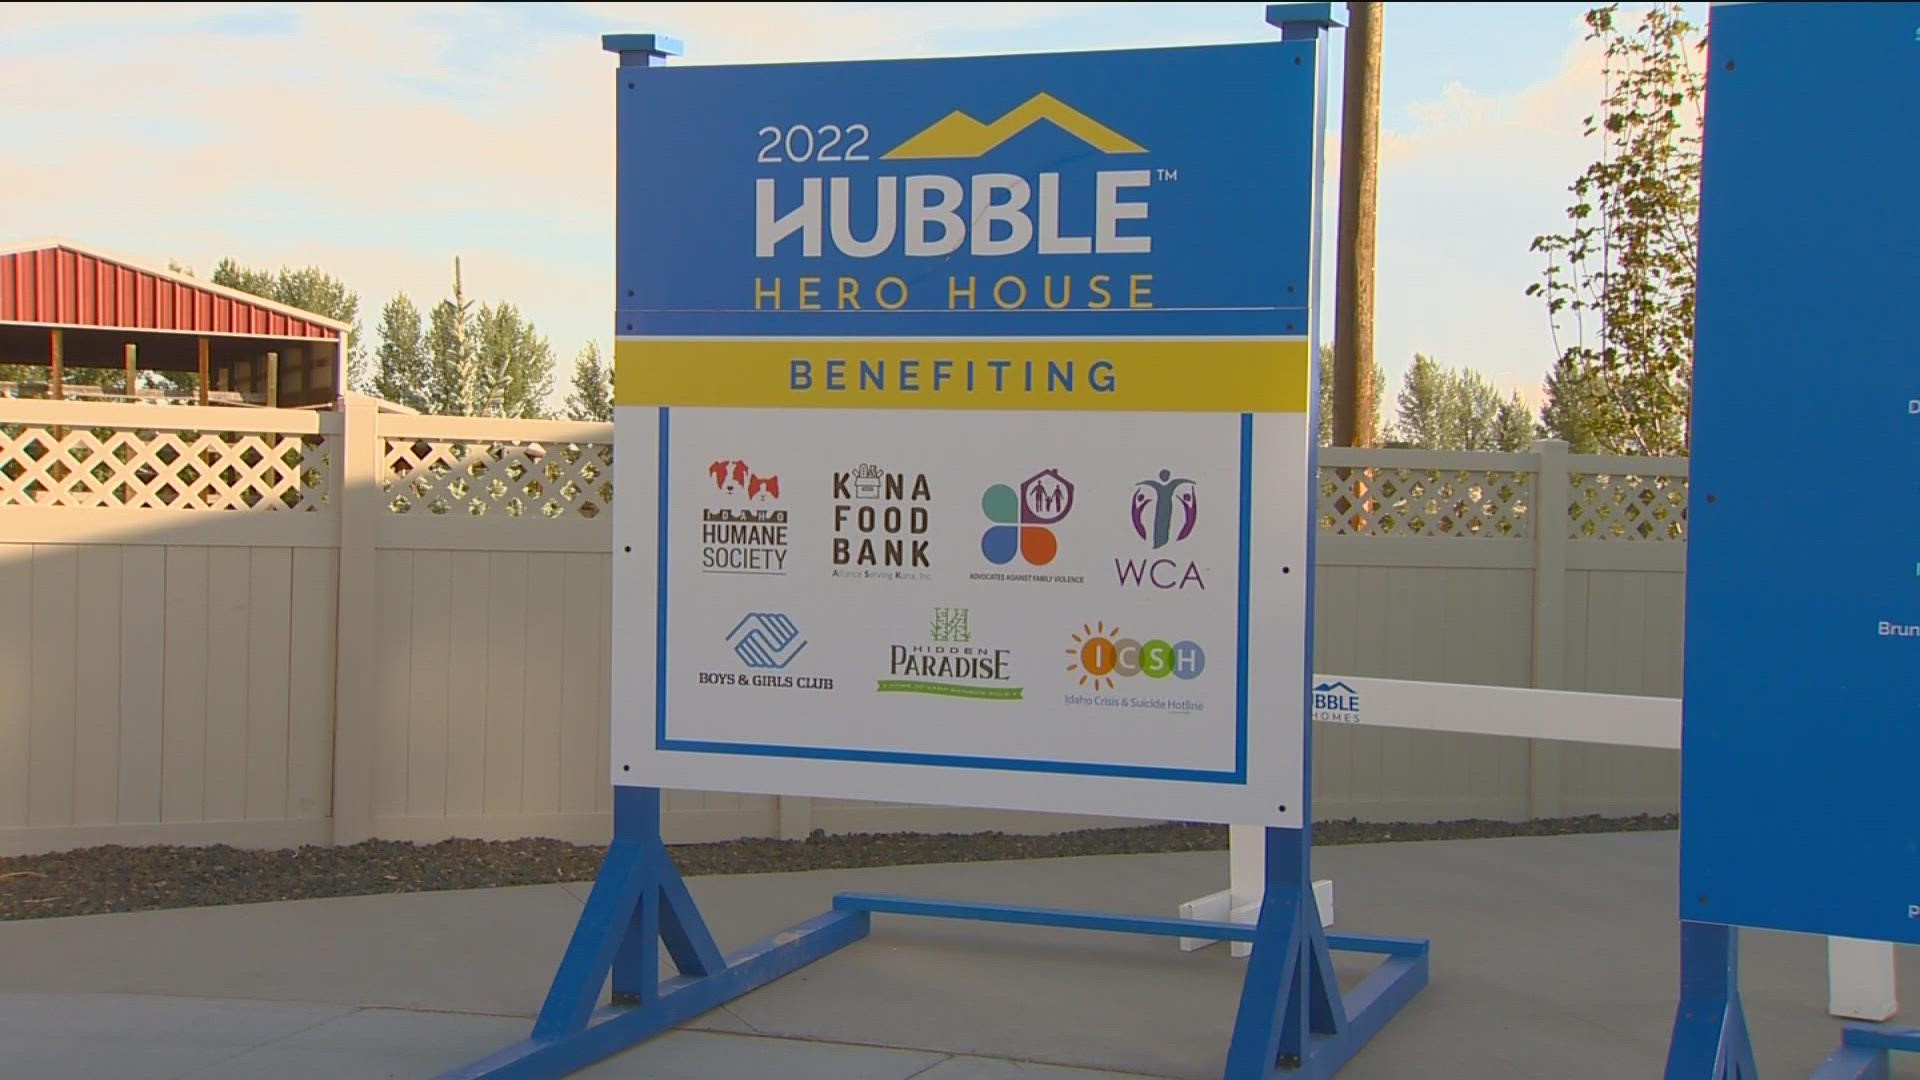 In addition to generous support for 7Cares Idaho Shares, Hubble gives big to Idaho charities through its Hero House program.